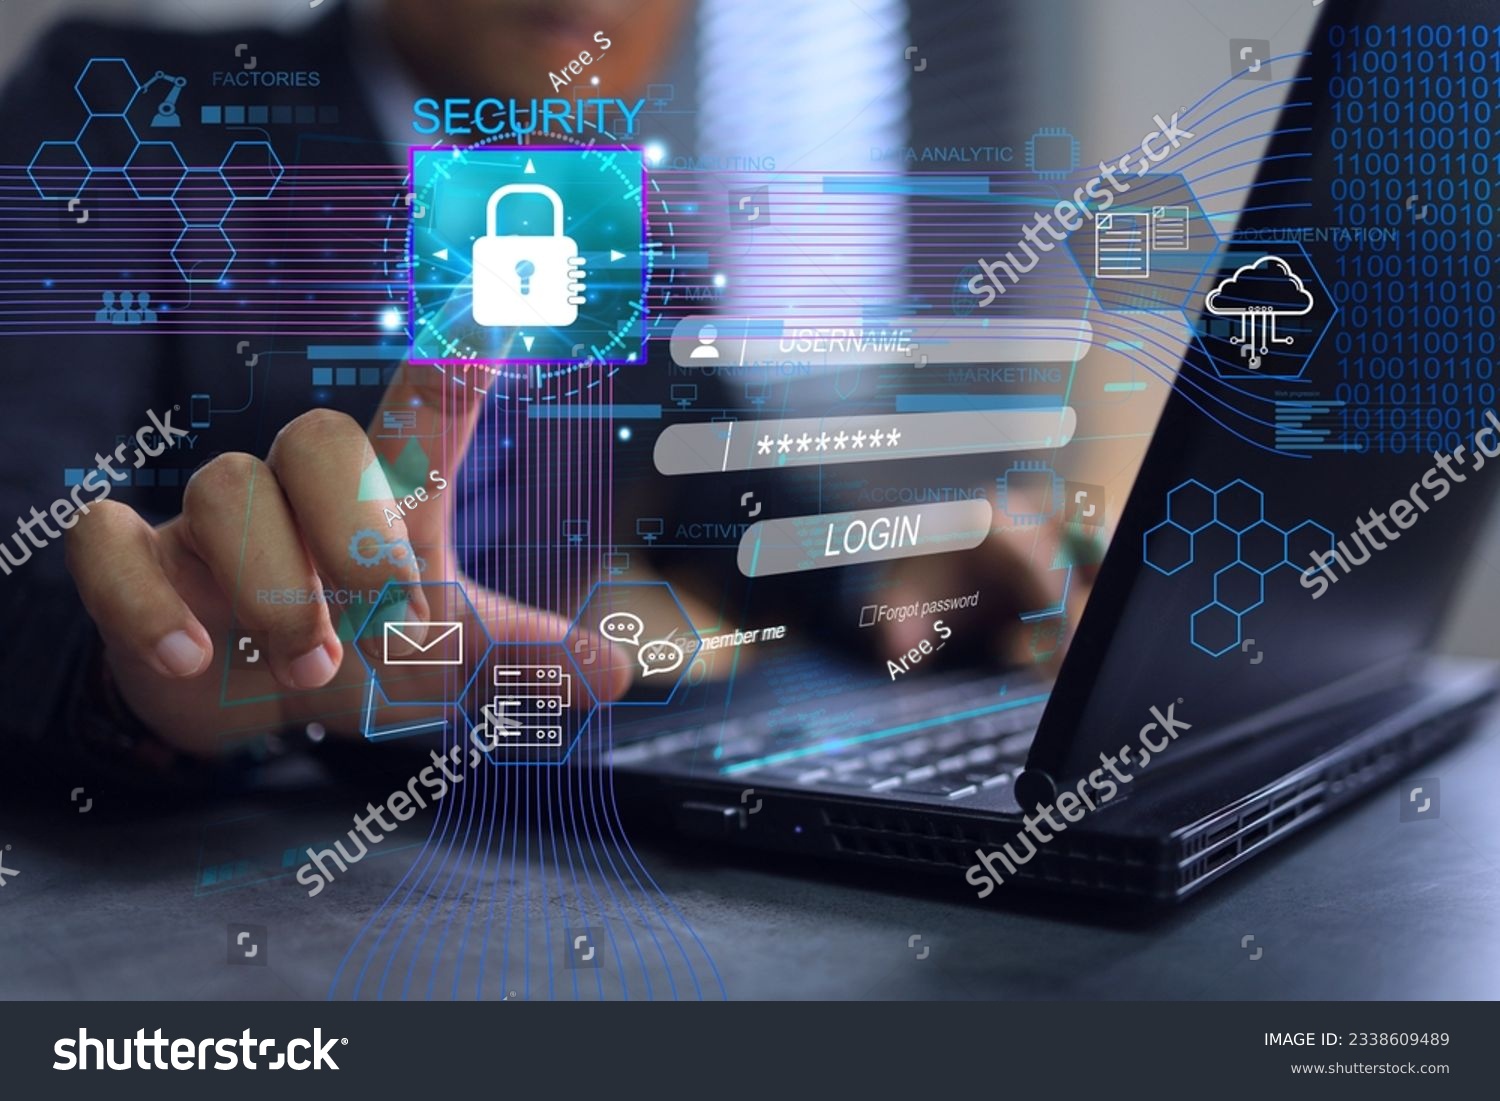 Businessman using the laptop in office and screen appears to enter the username and password to login to the system. Cyber security for data information technology ISO IEC 27001 and 27002 concept. #2338609489